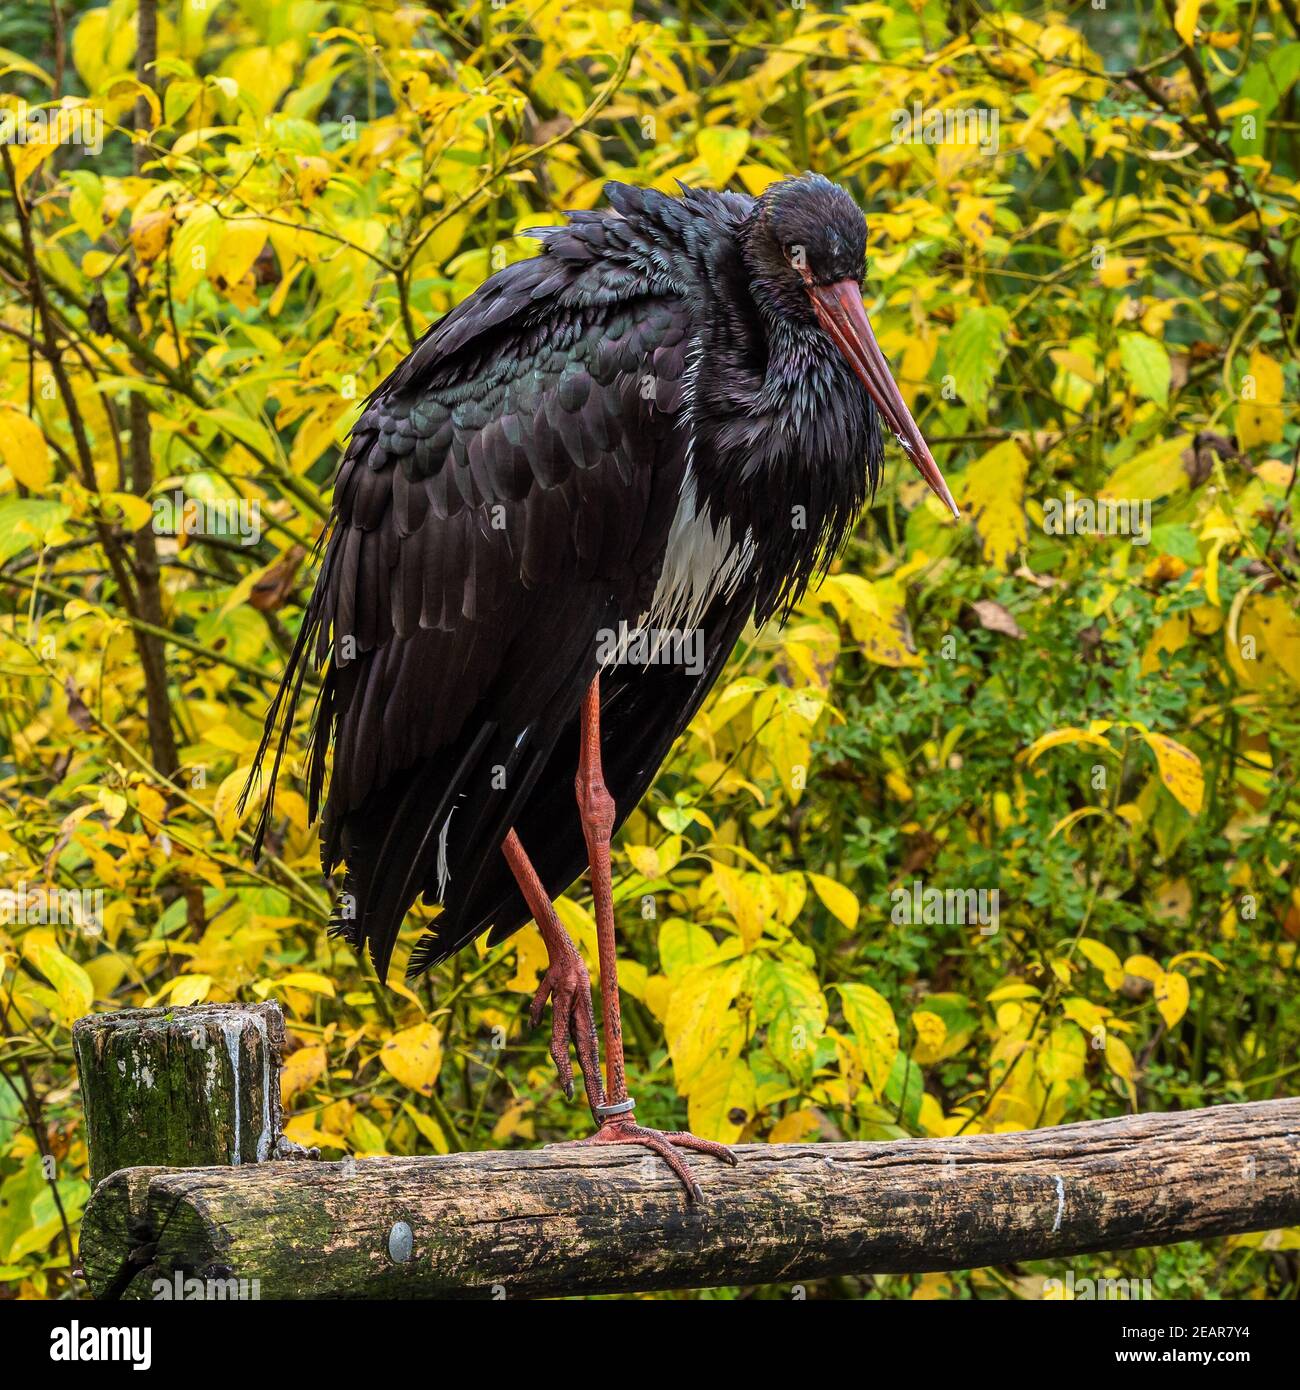 The Black stork, Ciconia nigra is a large bird in the stork family Ciconiidae. Stock Photo